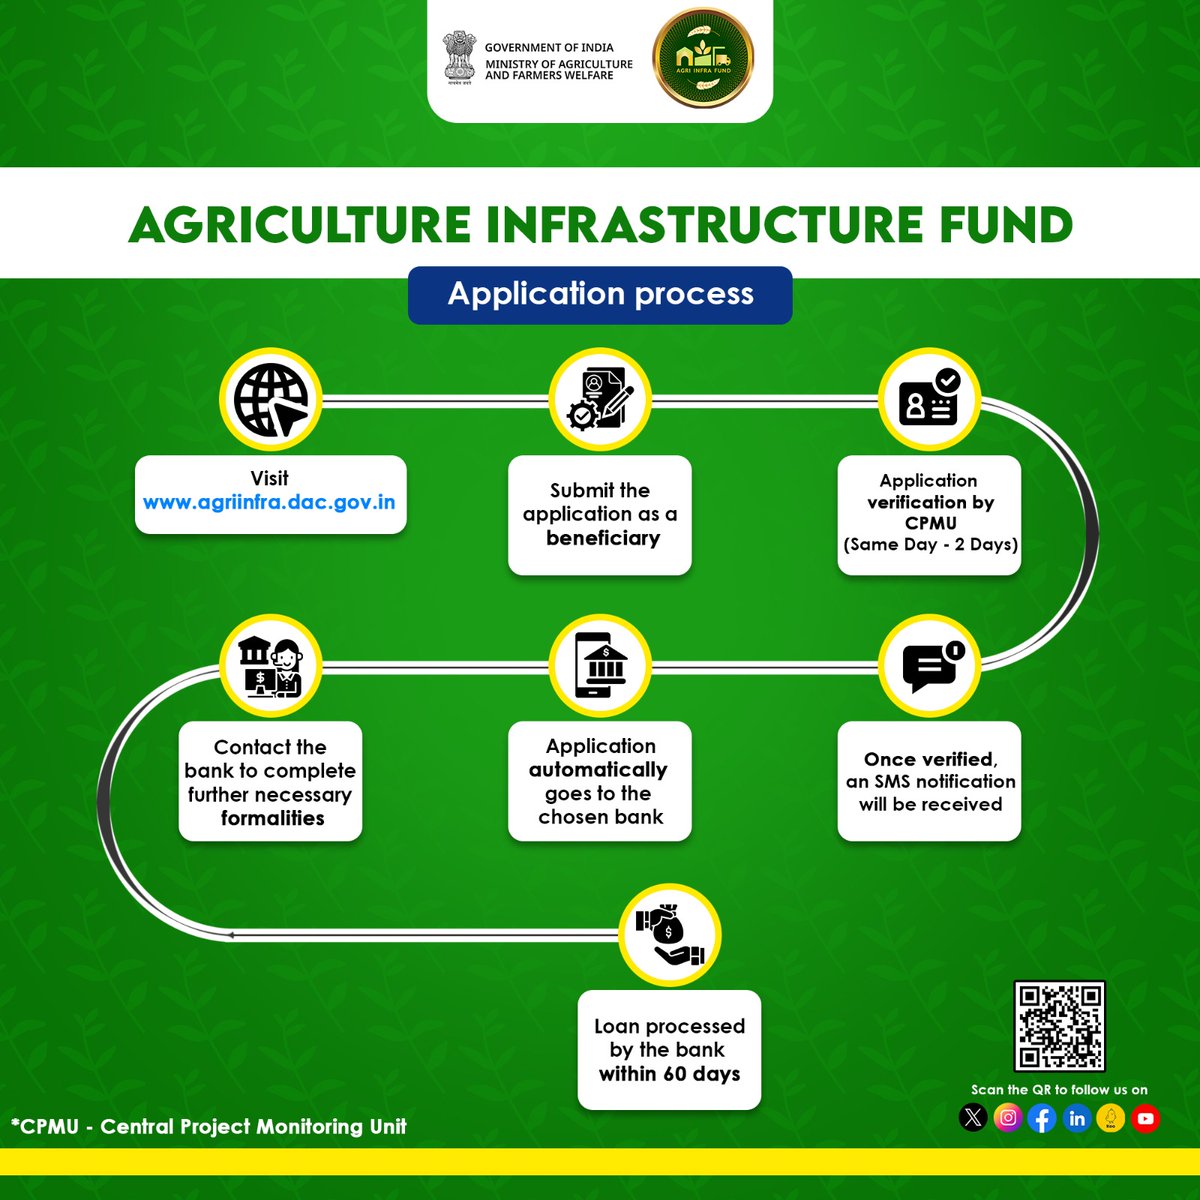 Agriculture Infrastructure Fund(#AIF) provides debt financing facilities for post-harvest management infrastructure & community farming assets. Here is a step-wise application process to avail the benefits of the scheme. #agrigoi #agriinfrafund #postharvestmanagement #farming